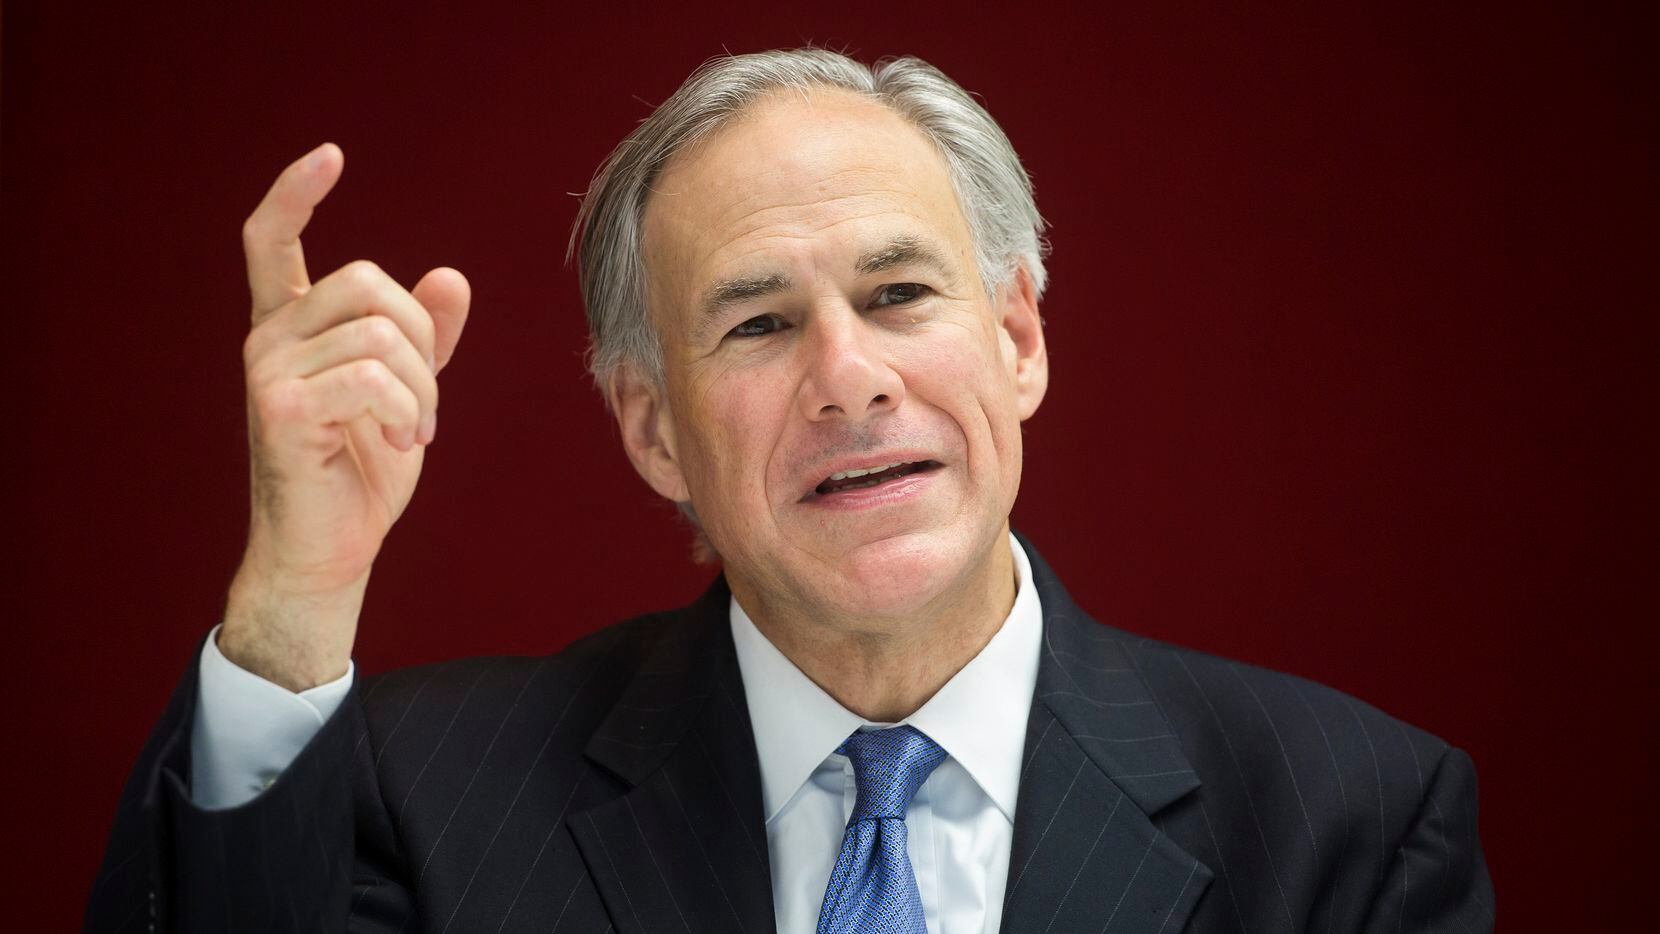 
As attorney general, Gov. Greg Abbott launched the T2 project, designed to streamline the...